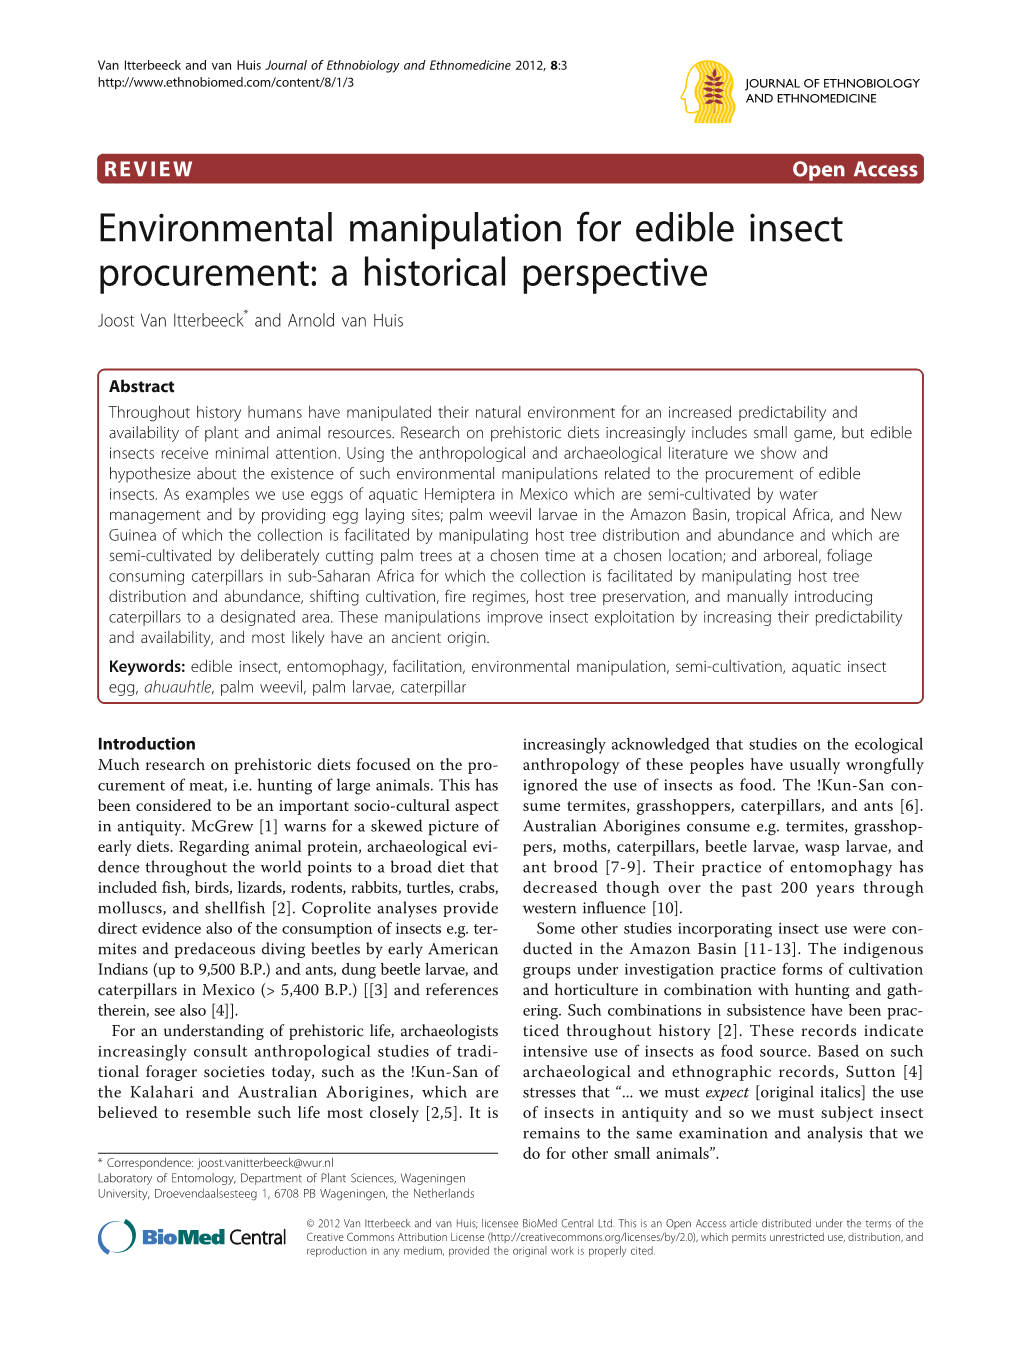 Environmental Manipulation for Edible Insect Procurement: a Historical Perspective Joost Van Itterbeeck* and Arnold Van Huis